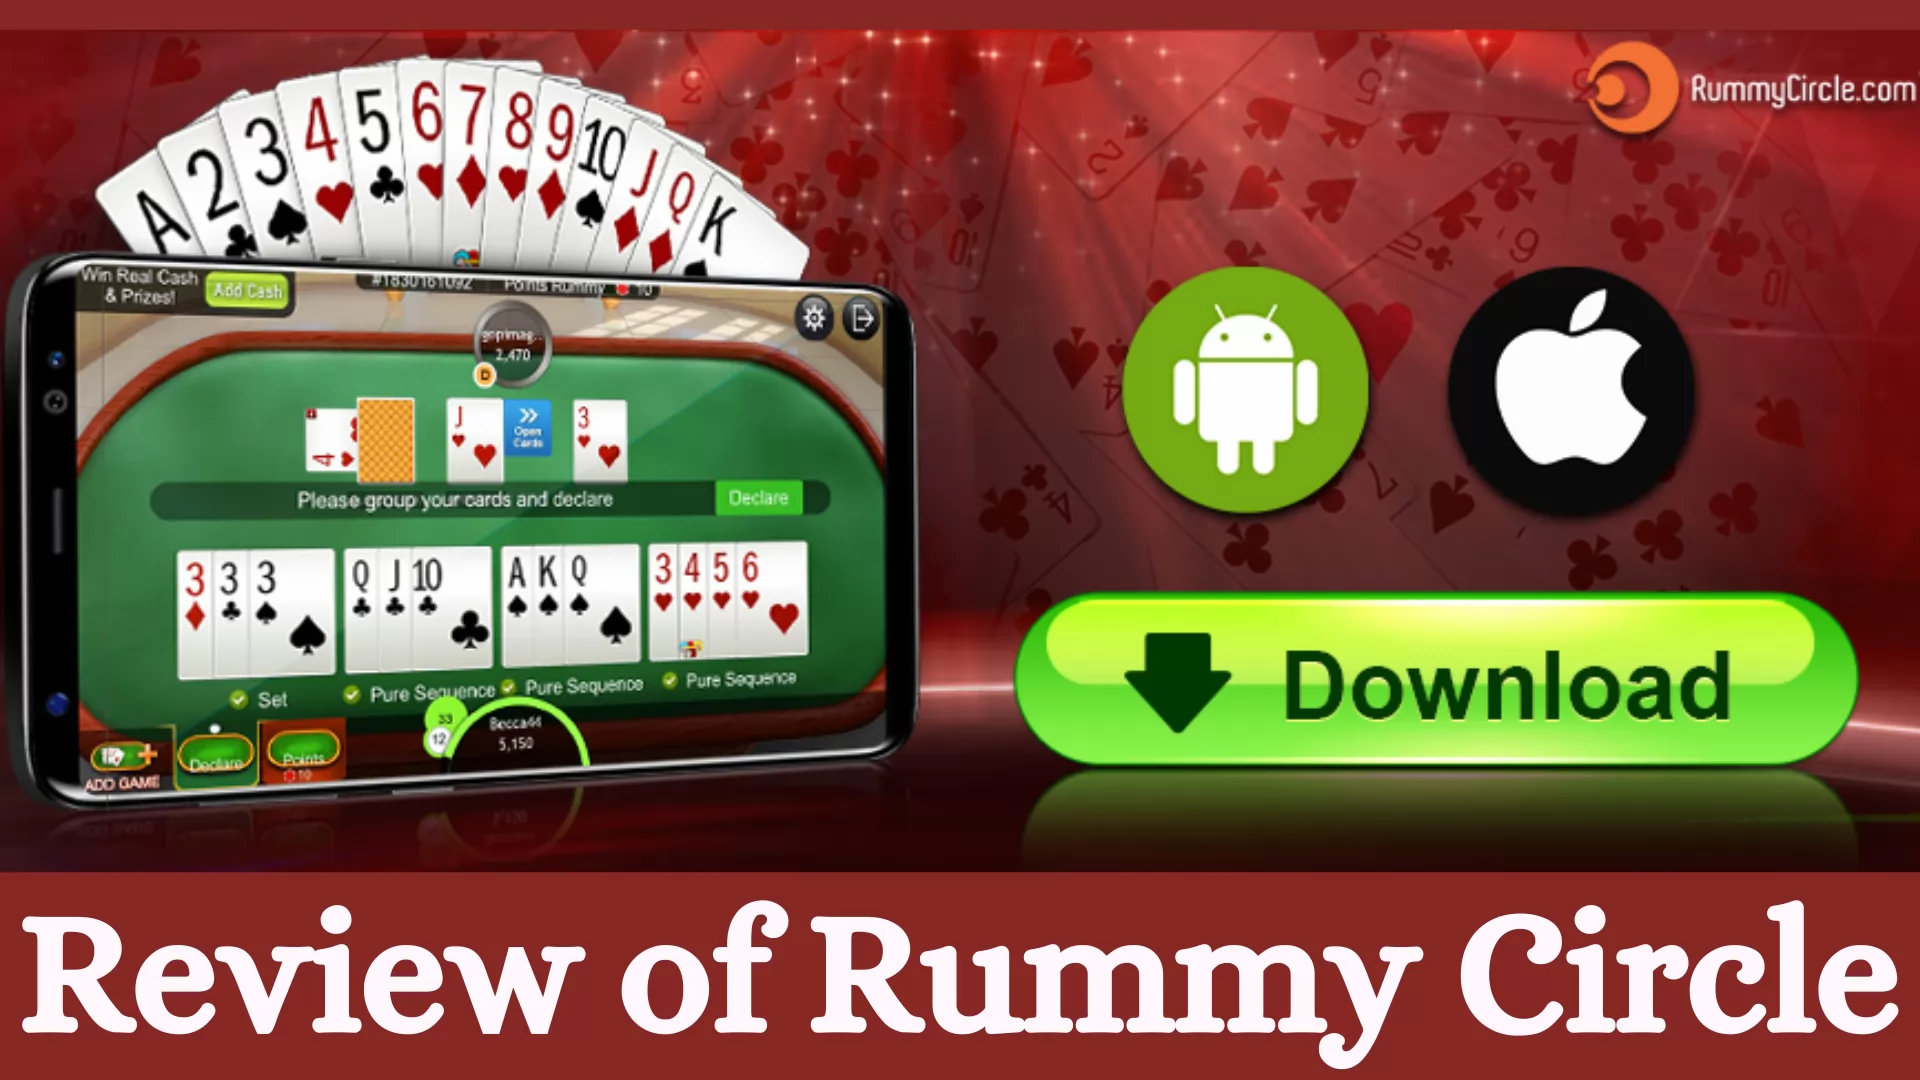 Review of Rummy Circle